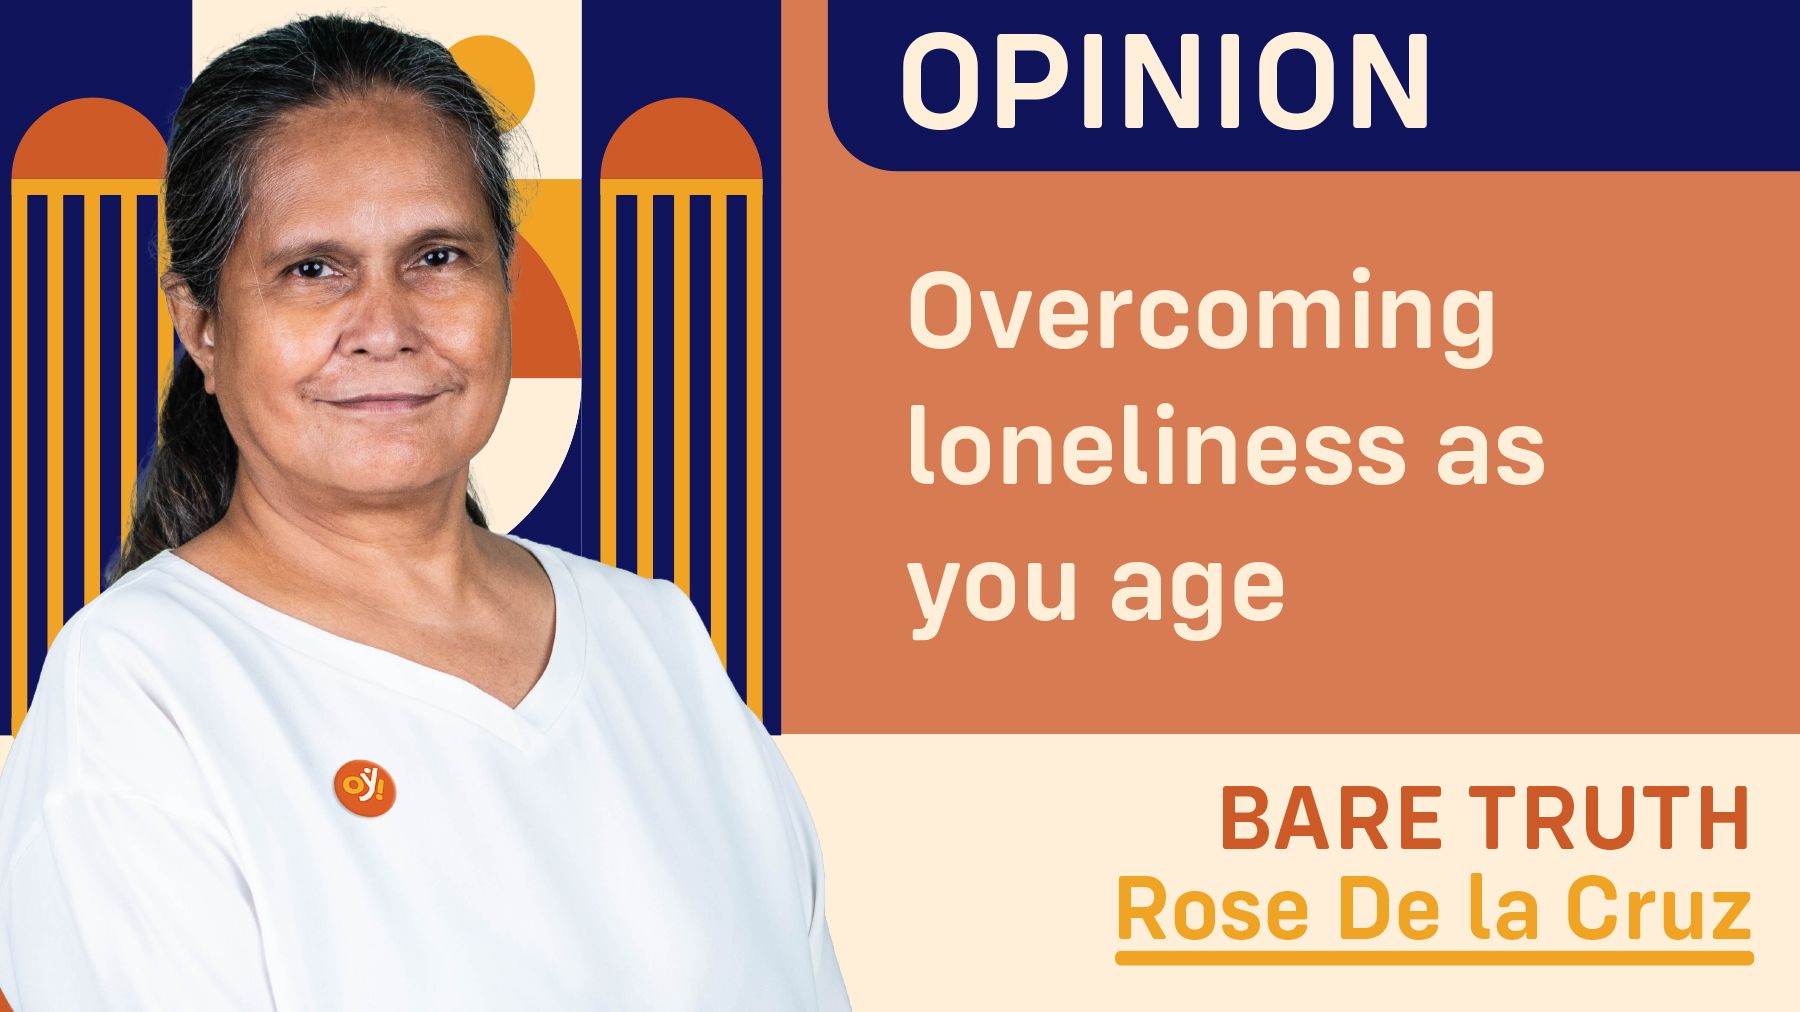 Overcoming loneliness as you age